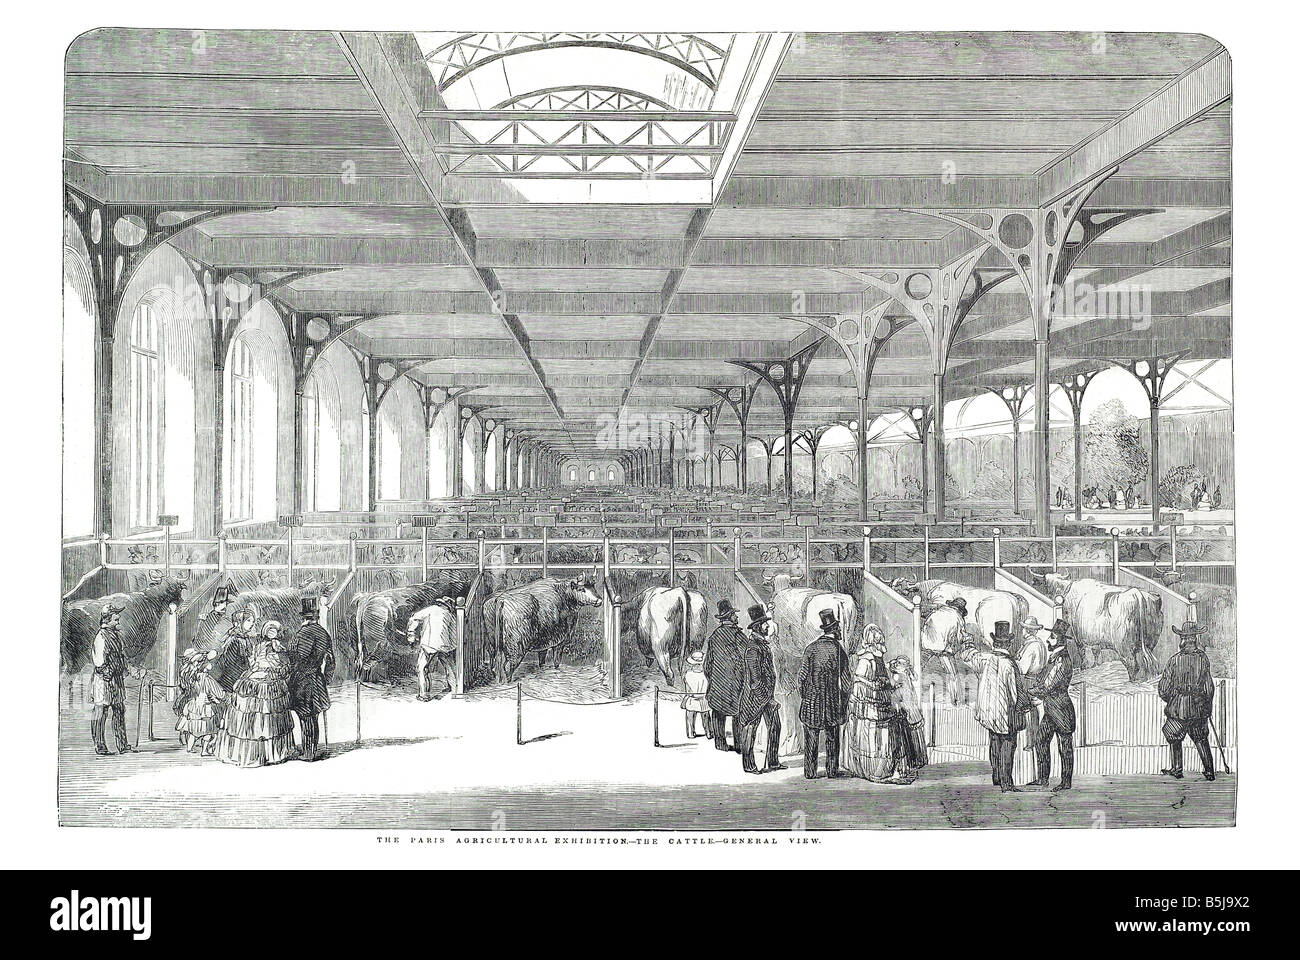 The paris agricultural exhibition the cattle general view June 21 1856 The Illustrated London News Page 676 Stock Photo